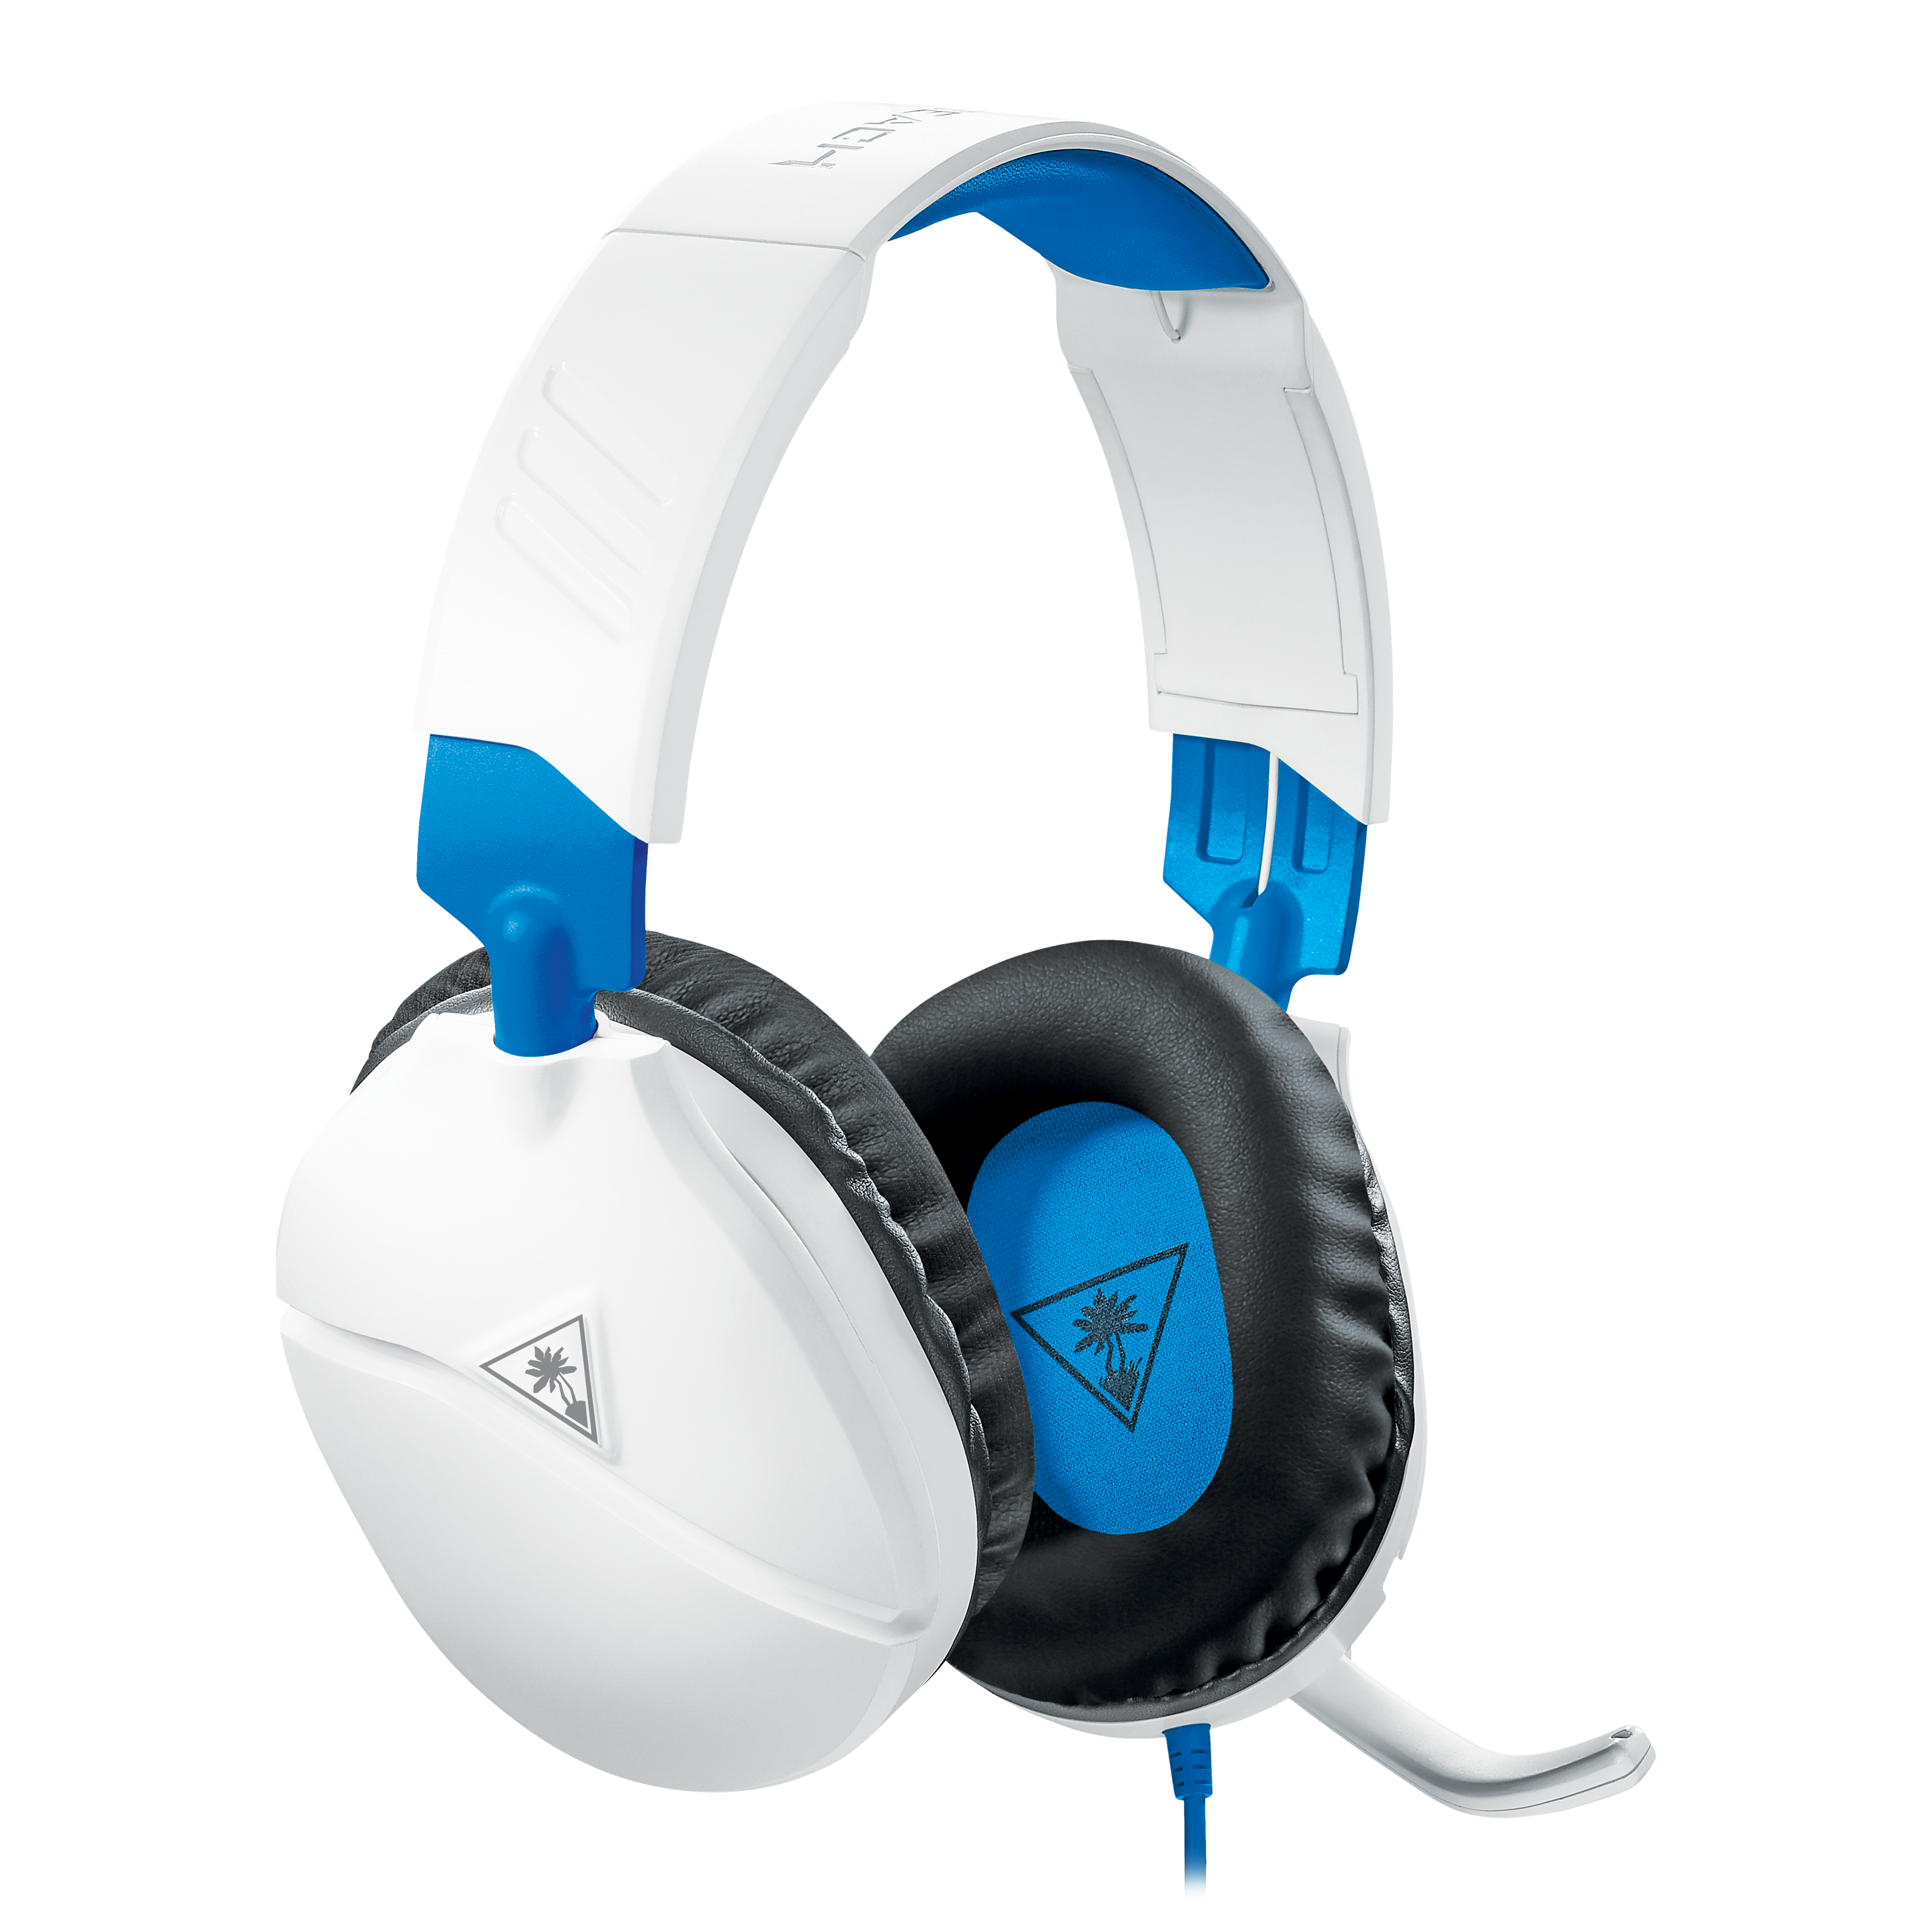 Recon 70 Gaming Headset For Ps4 White Turtle Beach Uk